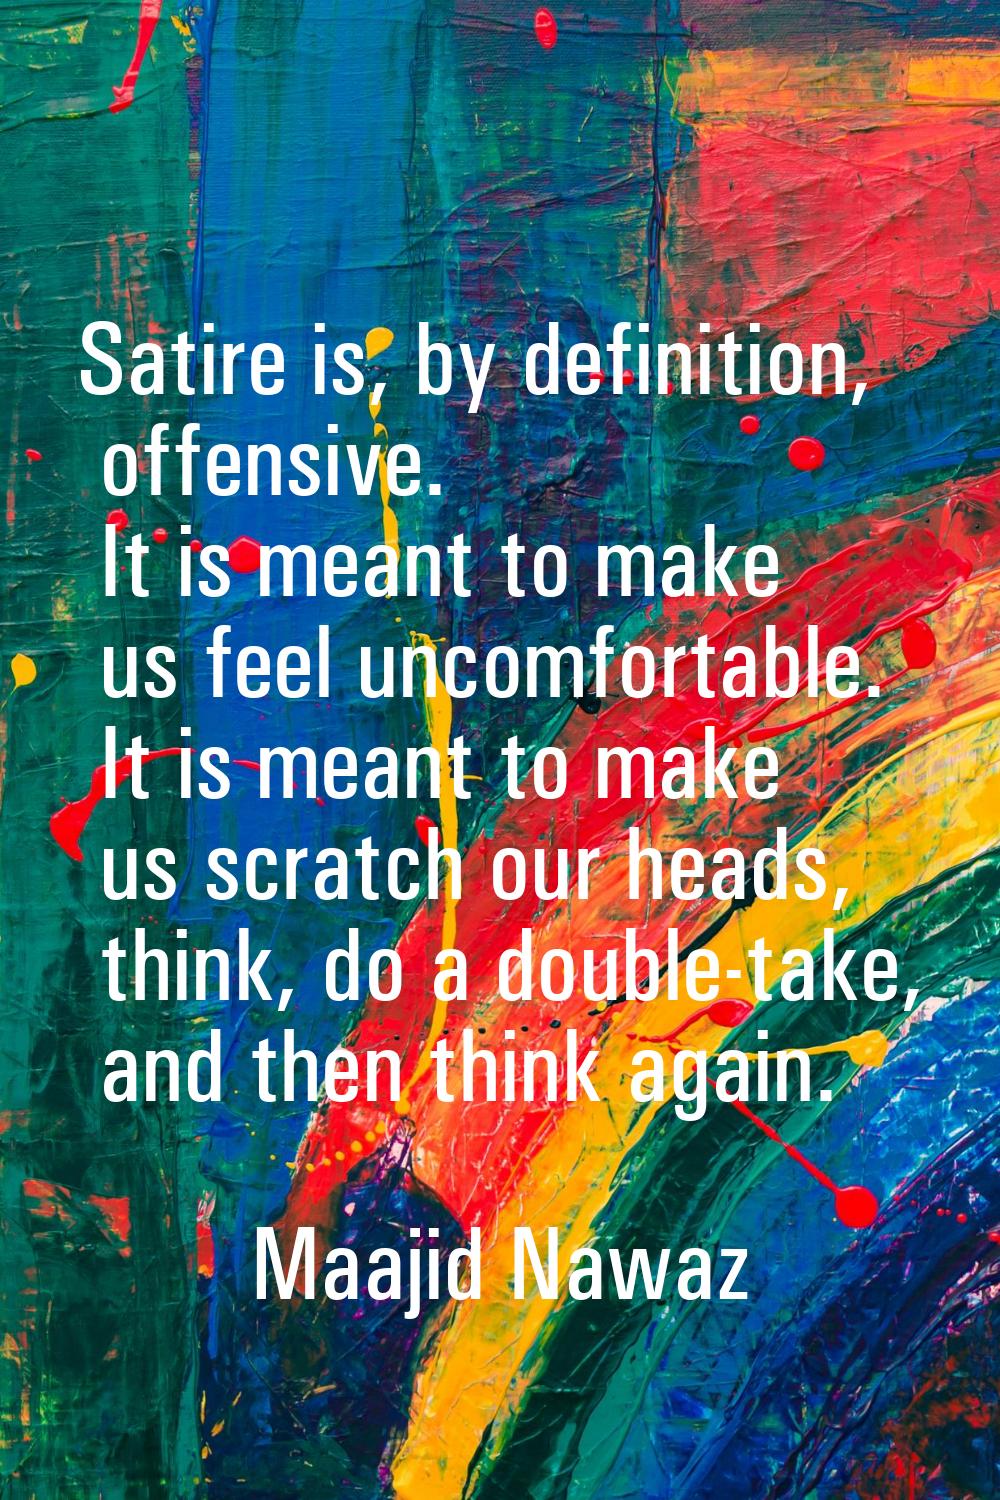 Satire is, by definition, offensive. It is meant to make us feel uncomfortable. It is meant to make